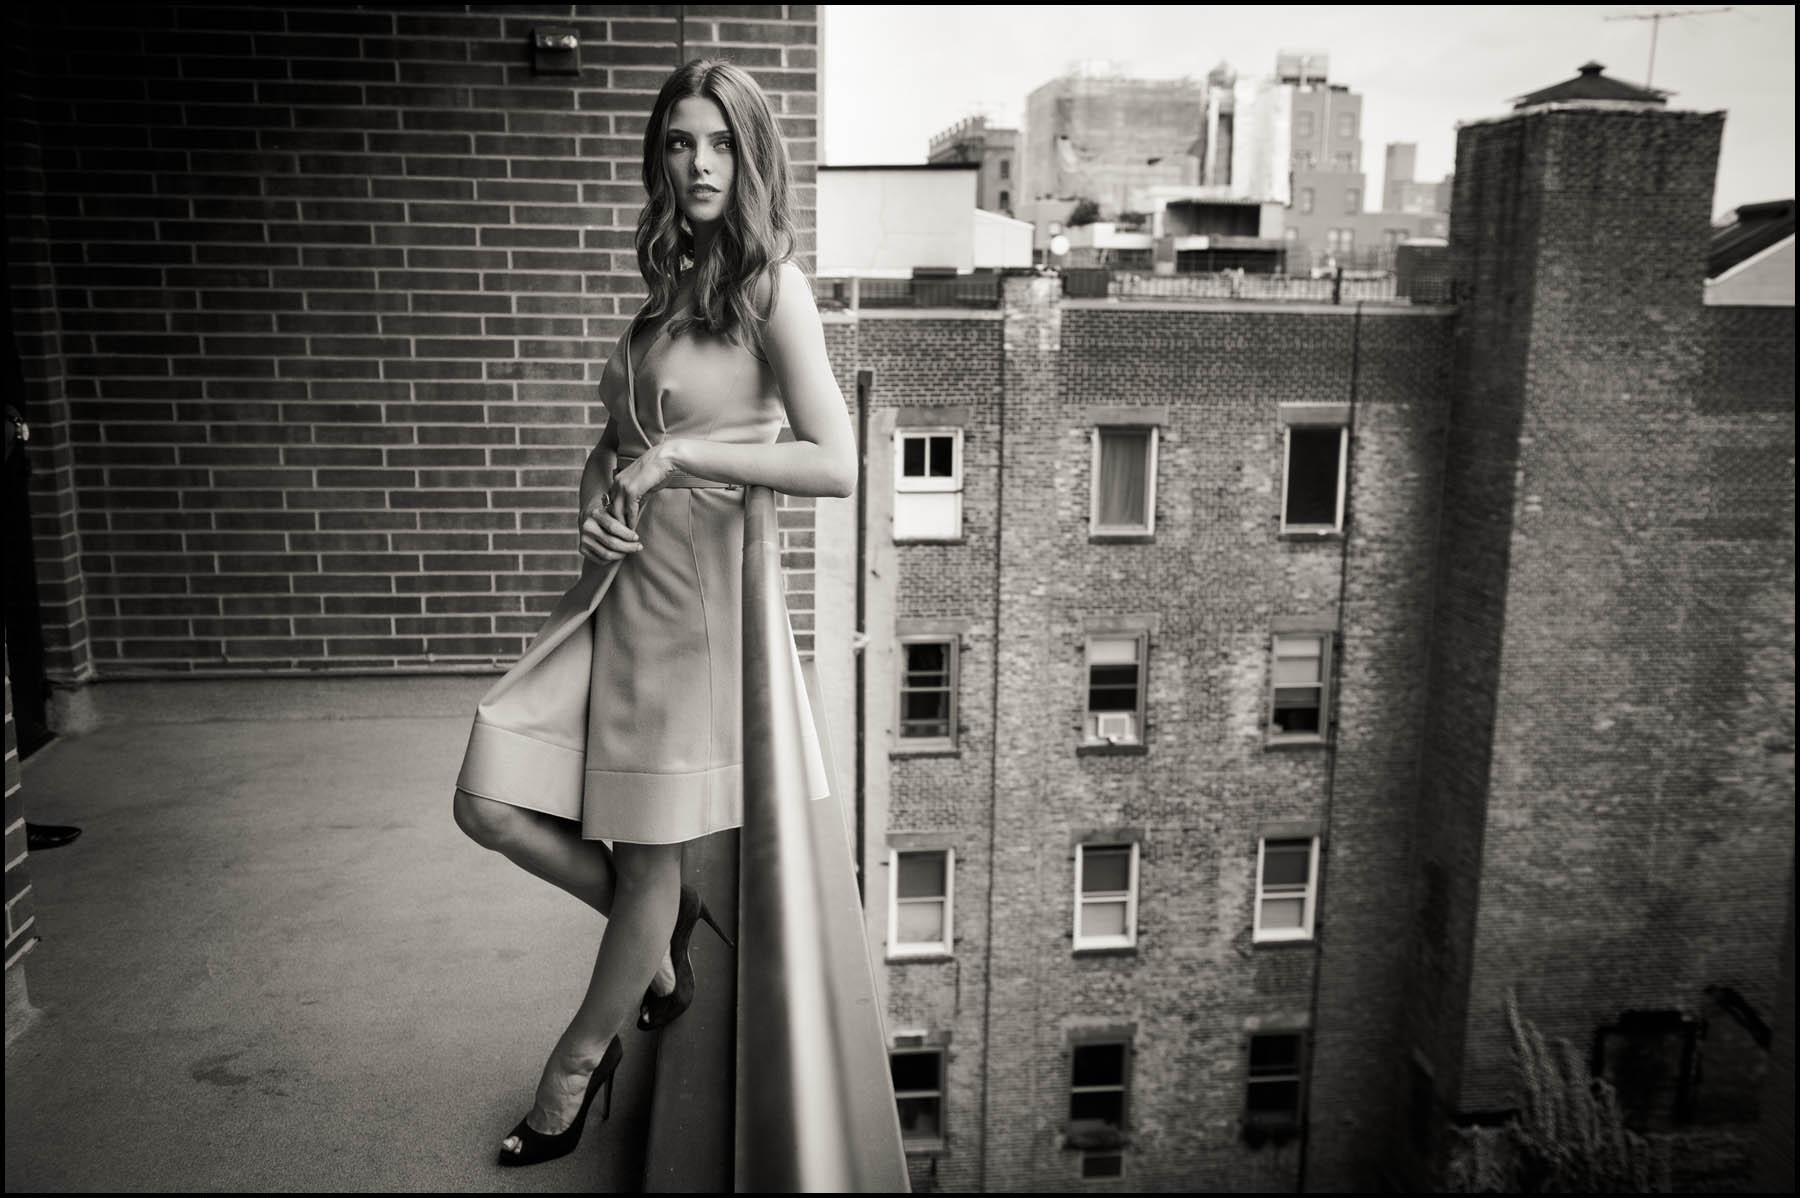 Actress Ashley Greene photographed September 27th, 2012 on a balcony at the Crosby Hotel in Soho. The actress is best known for her roles in the Twilight franchise of movies. 